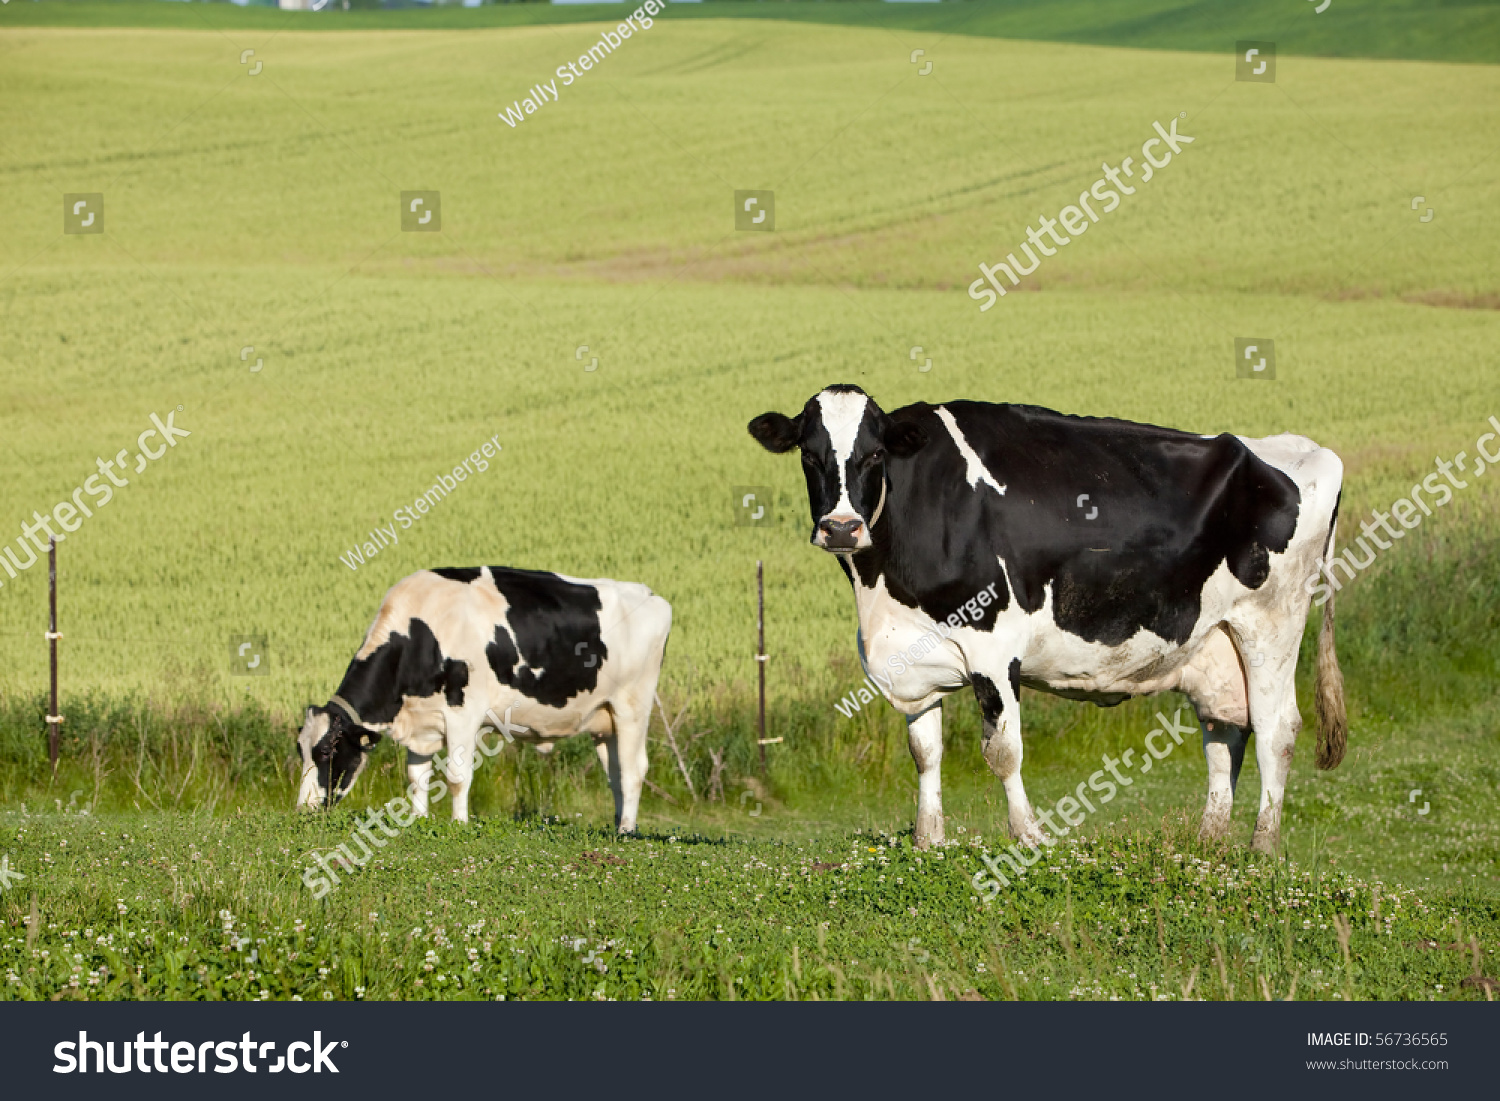 black and white jersey cow 